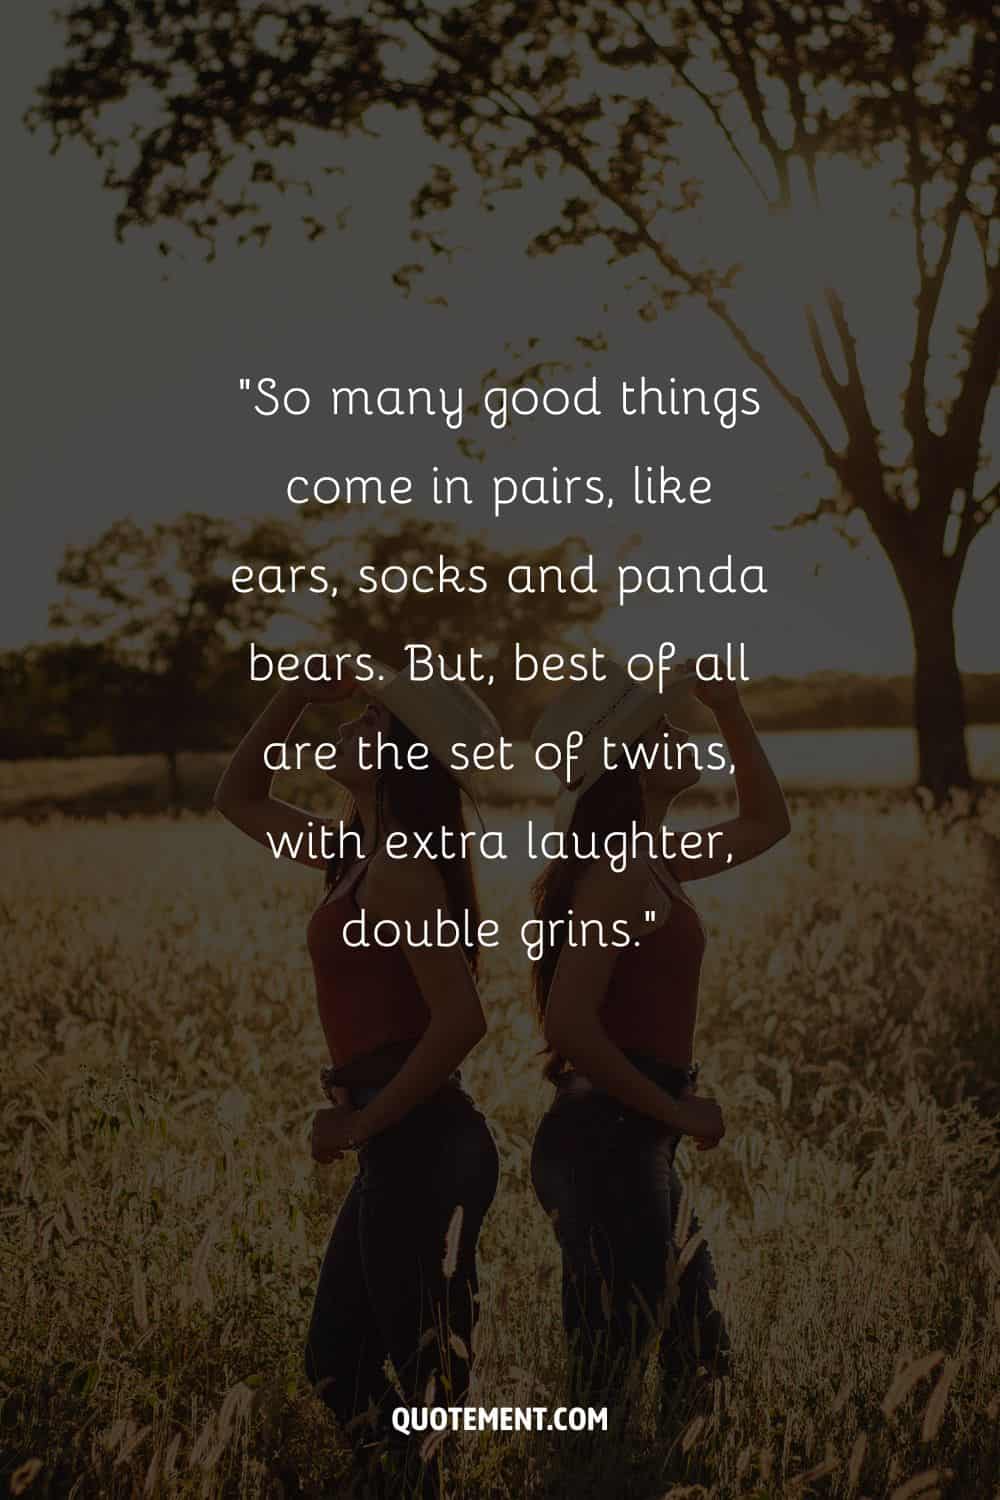 “So many good things come in pairs, like ears, socks and panda bears. But, best of all are the set of twins, with extra laughter, double grins.” – Unknown